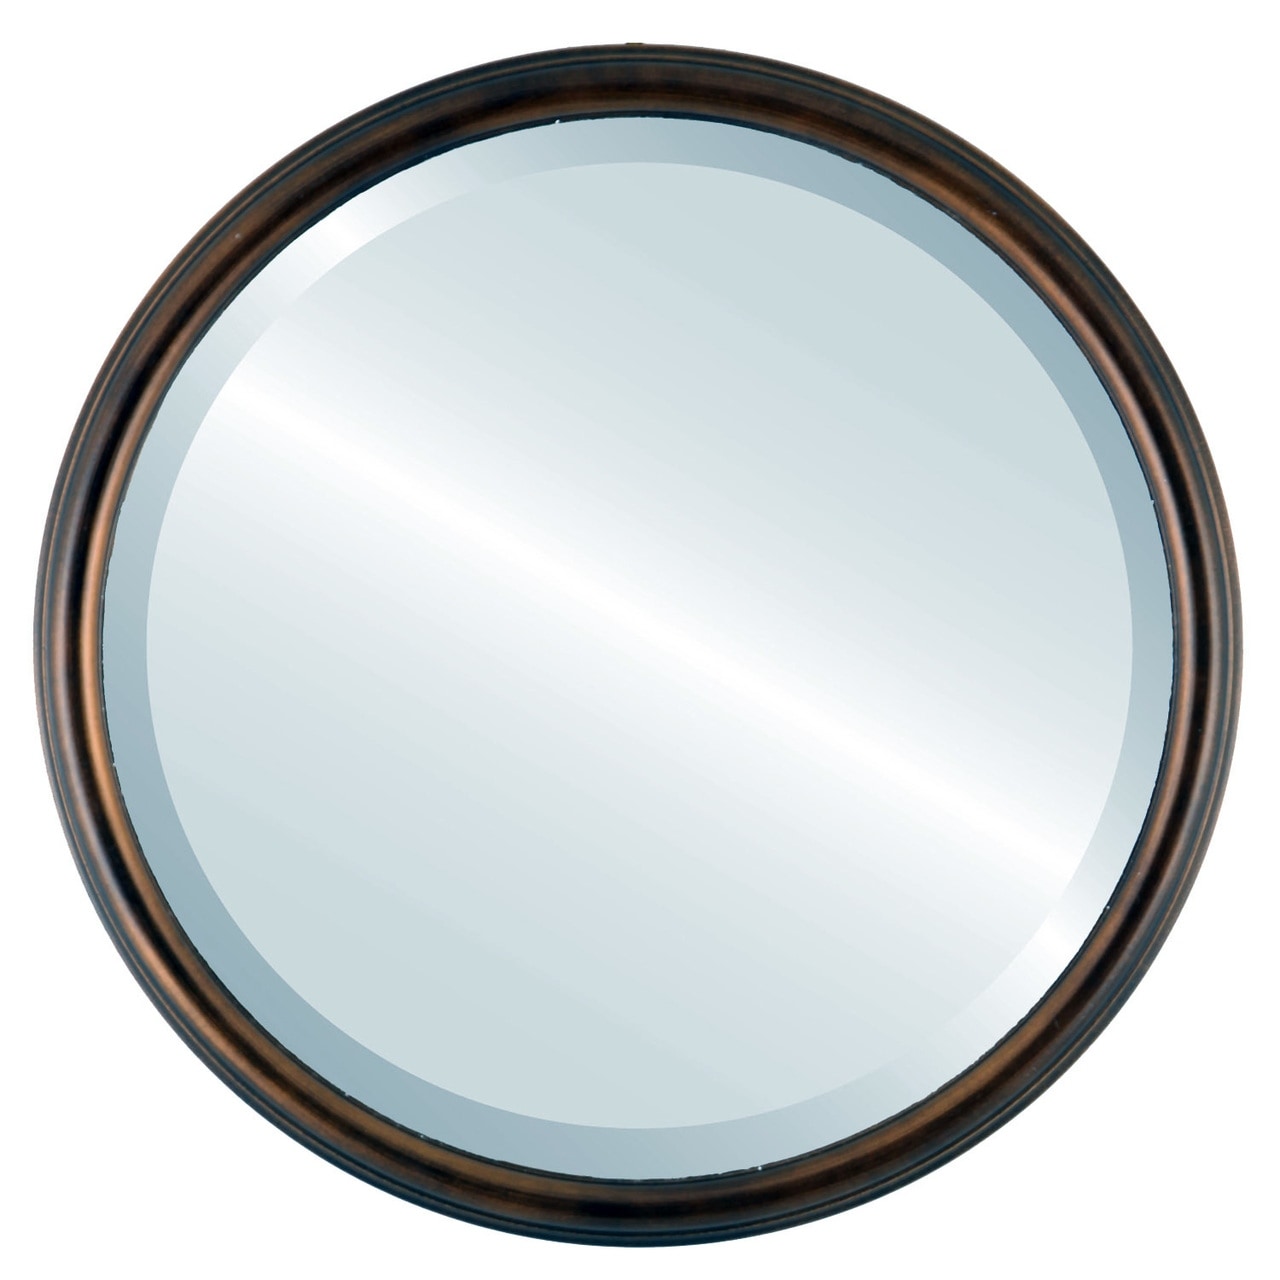 Hamilton Framed Round Mirror in Rubbed Bronze with Silver Lip Antique  Bronze Bed Bath  Beyond 19471245